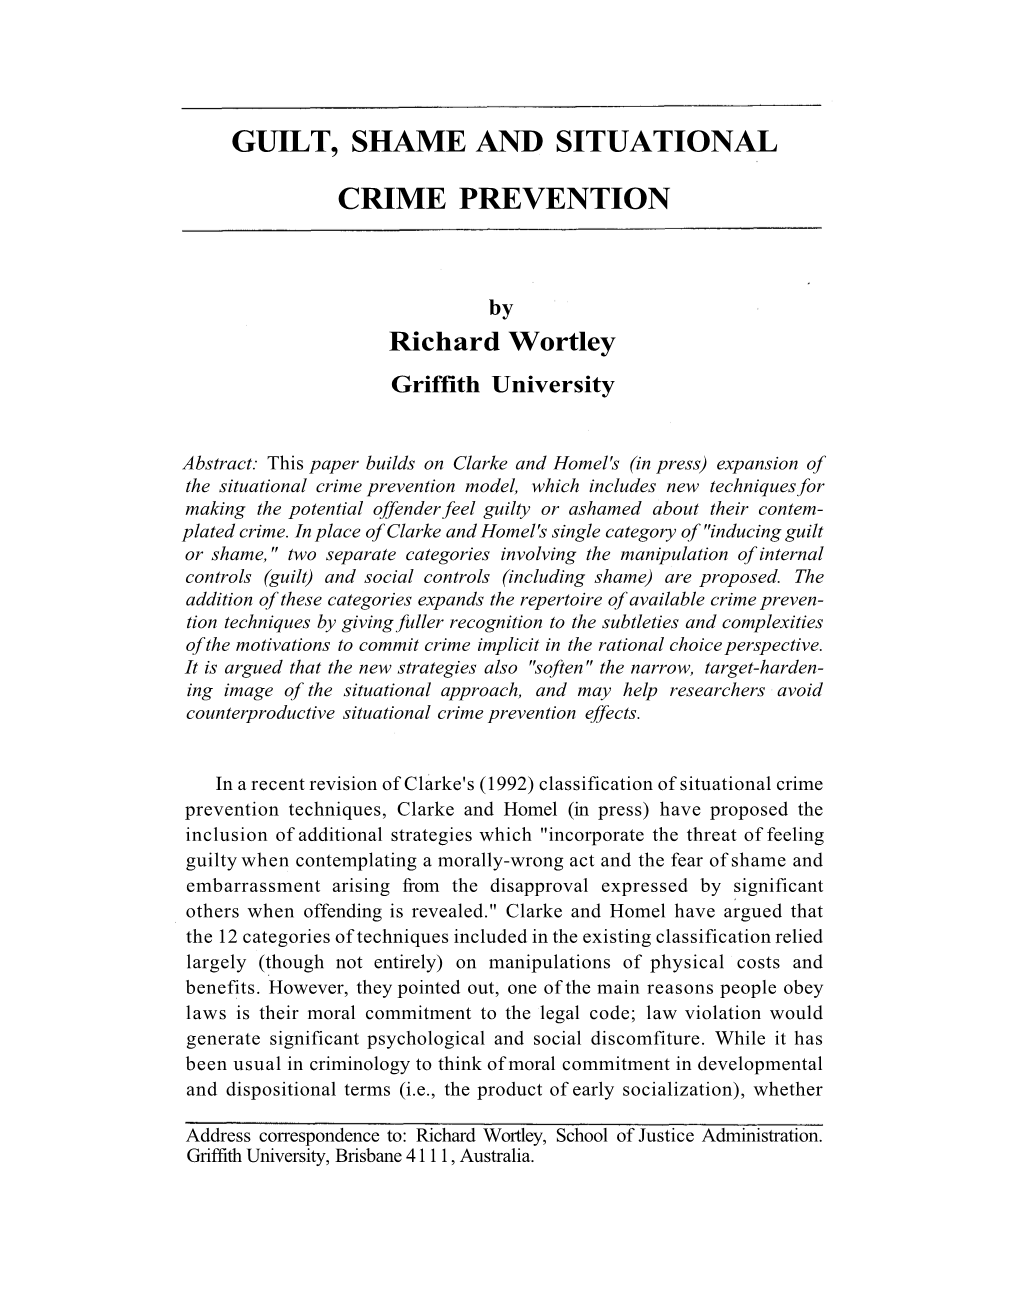 Guilt, Shame and Situational Crime Prevention